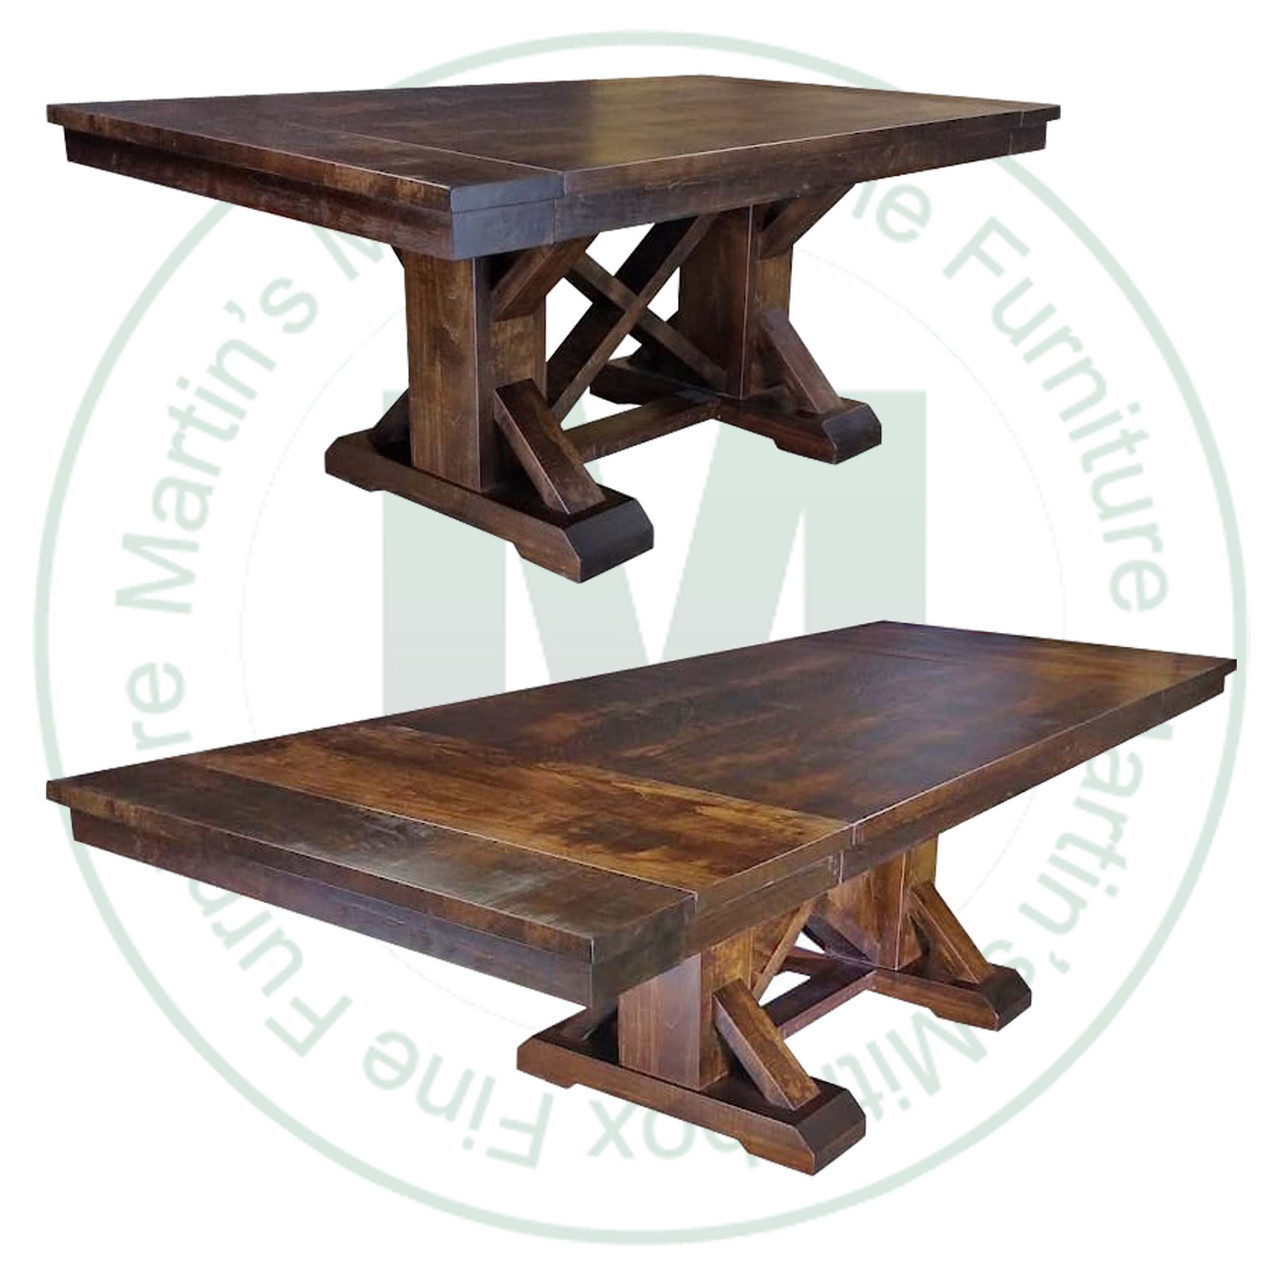 Wormy Maple Bonanza End Extension Pedestal Table 42'' Deep x 96'' Wide x 30'' High With 2 - 16'' End Leaves